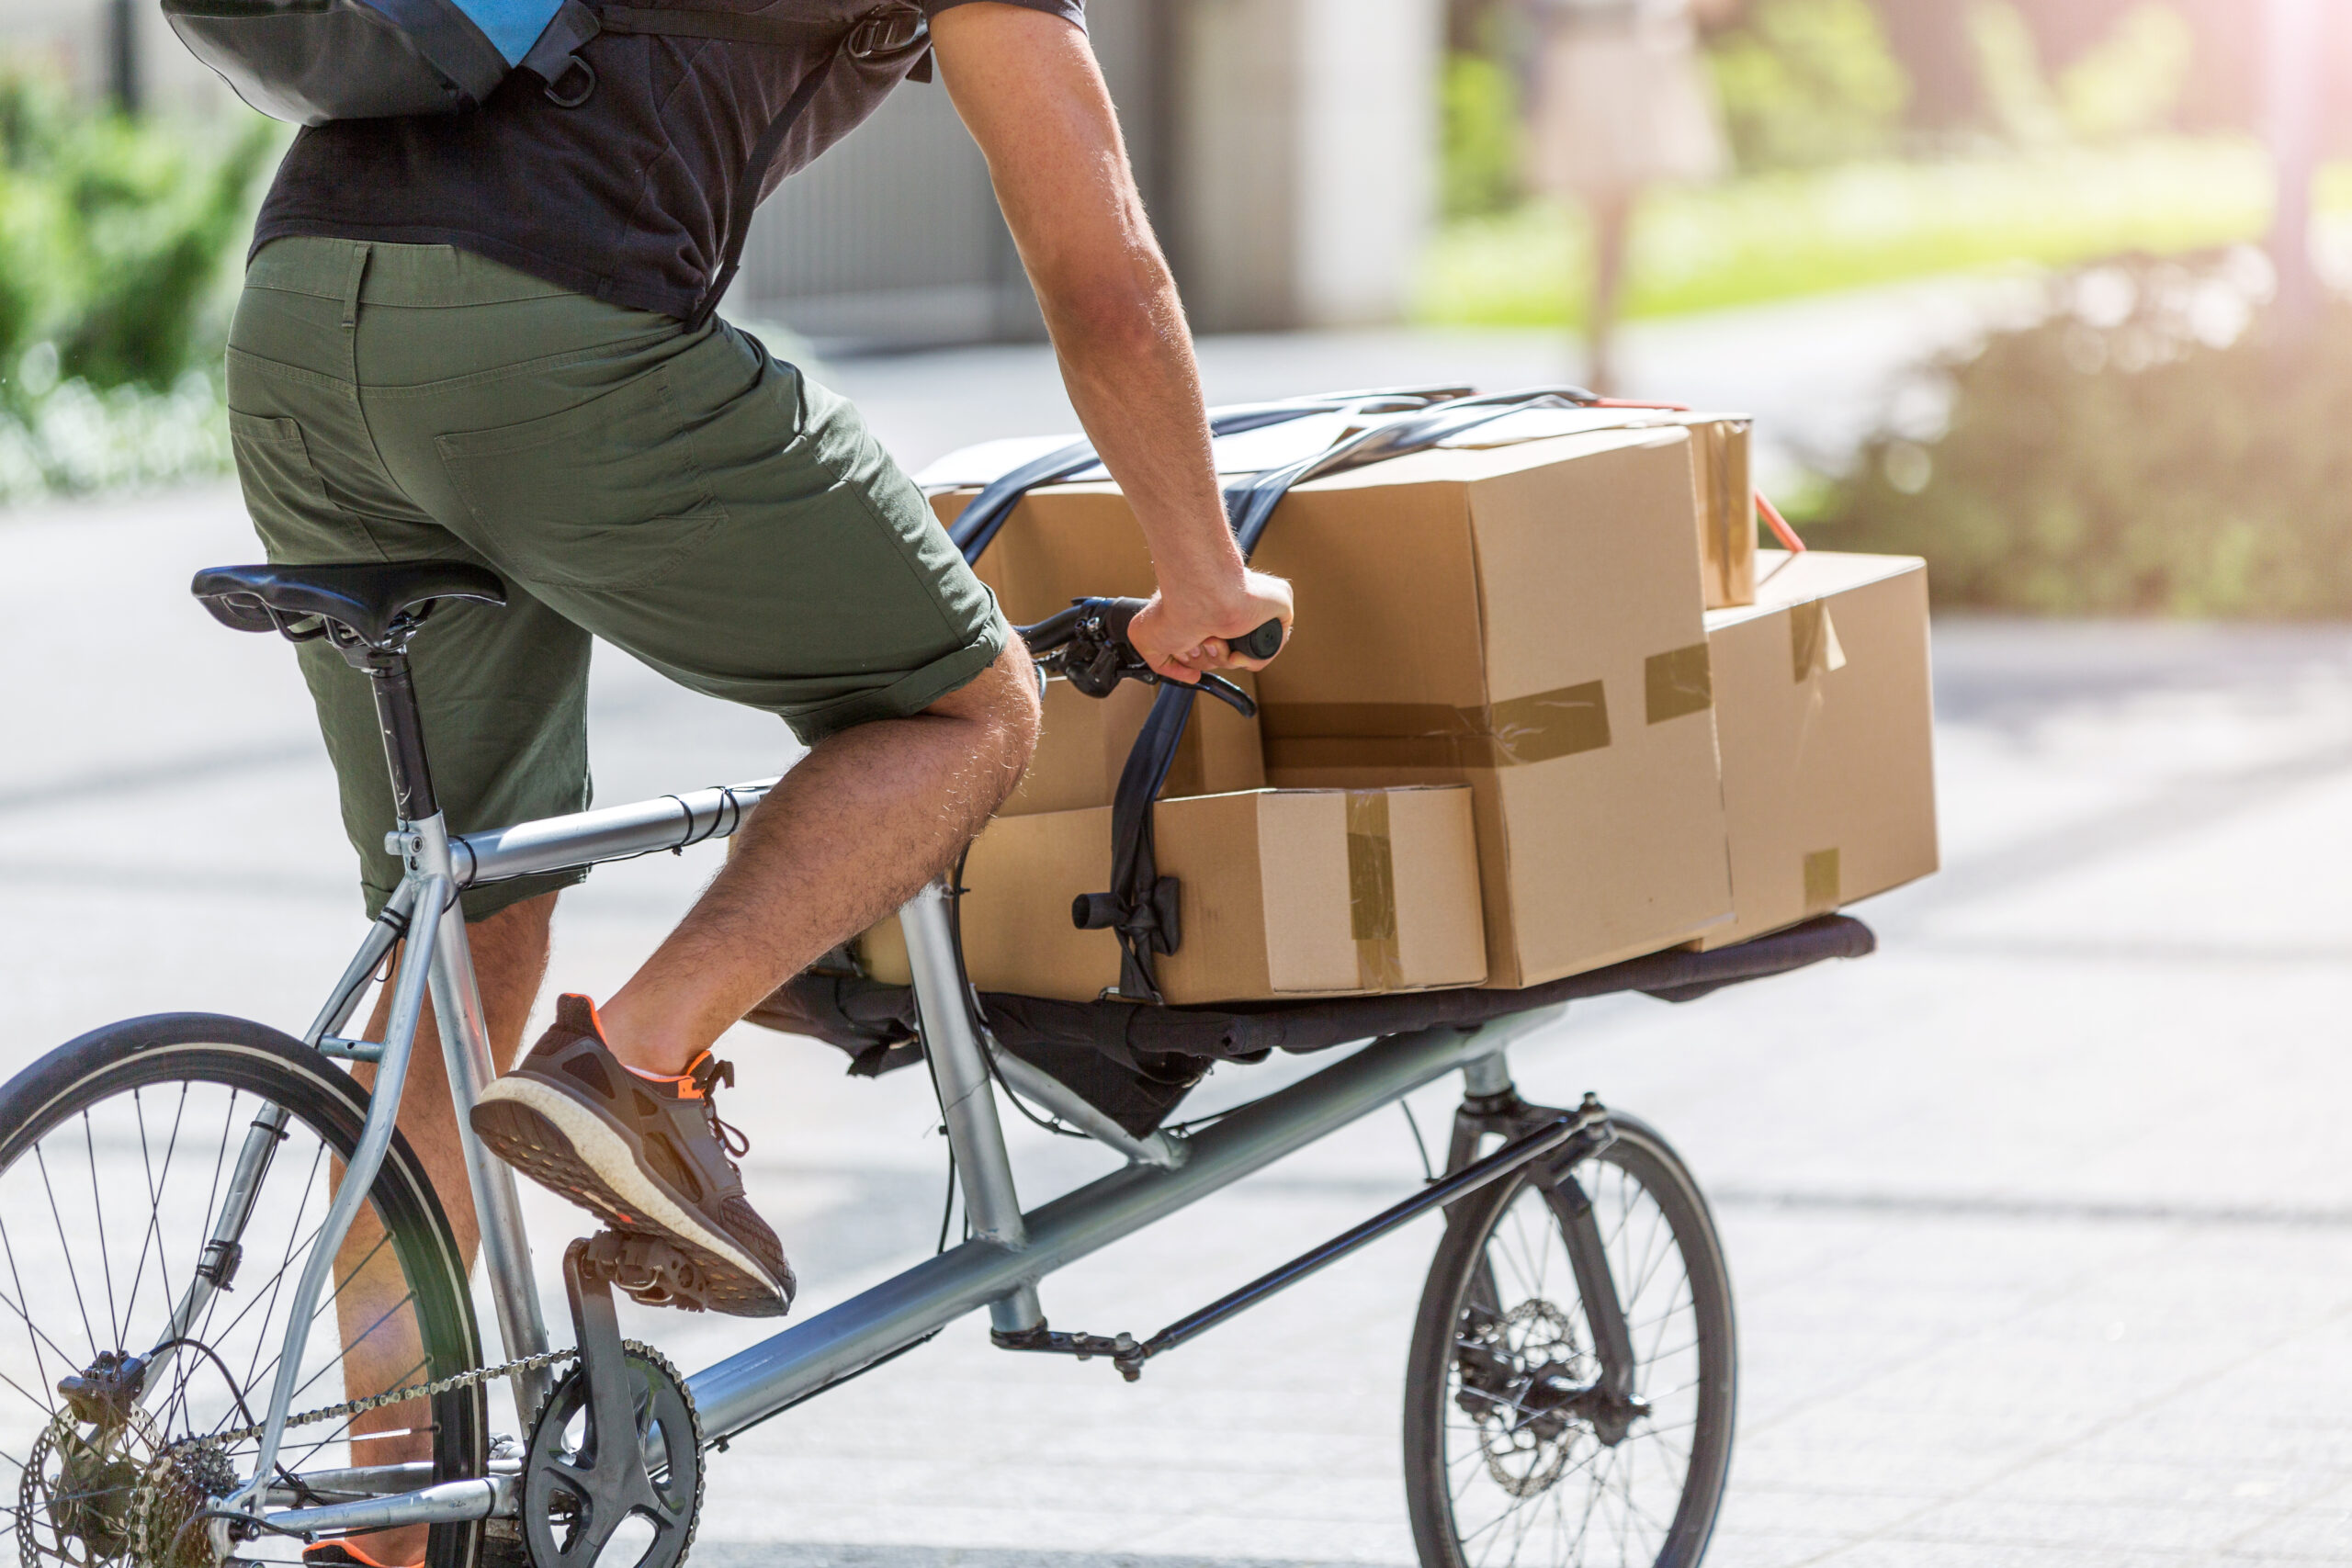 Urban logistics sector must prioritise wellbeing of riders, report stresses